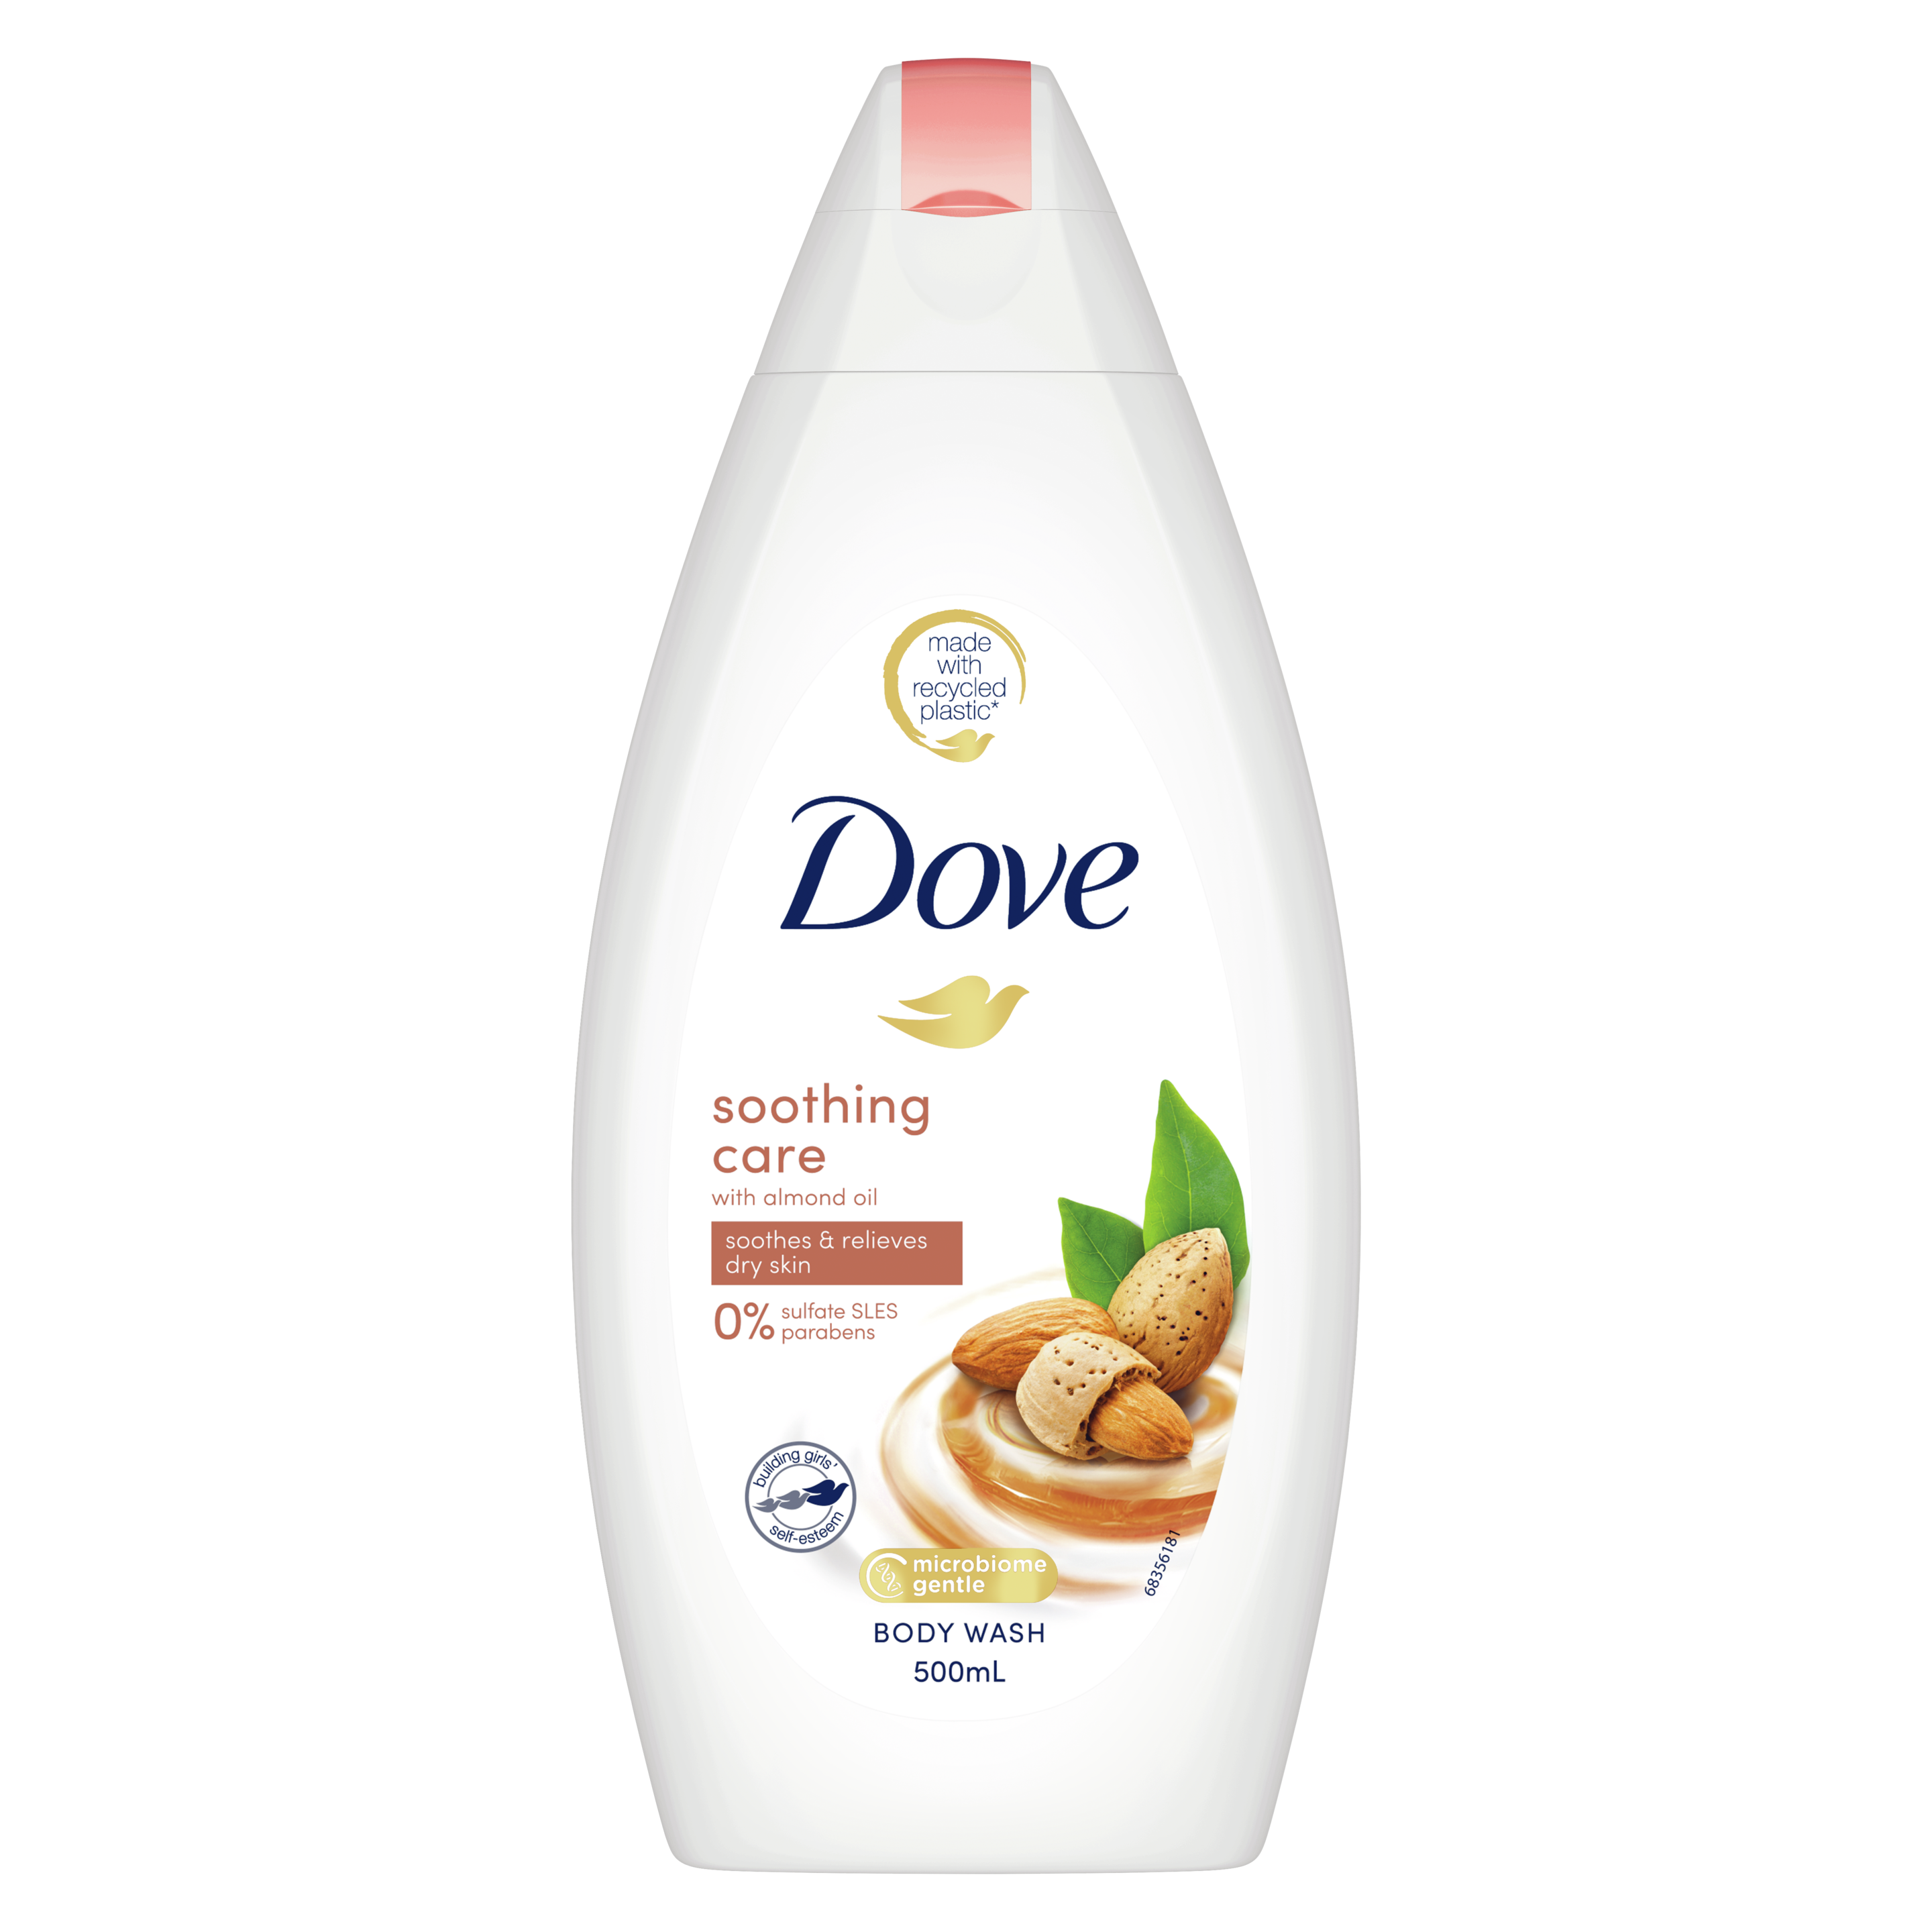 Dove Soothing Care Body Wash 500ml